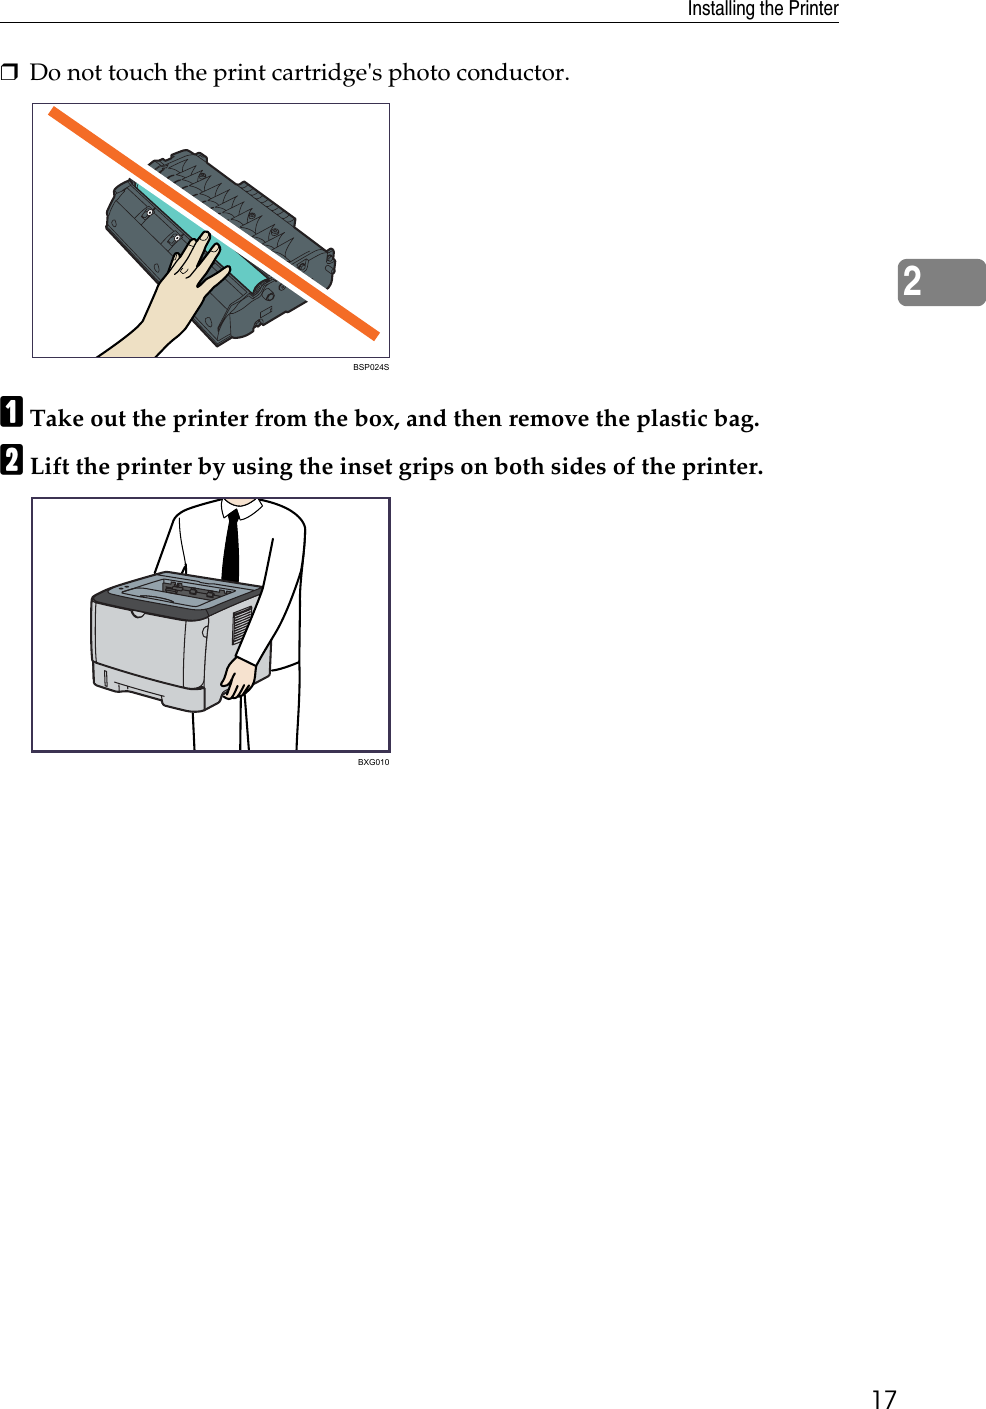 Installing the Printer172❒Do not touch the print cartridge&apos;s photo conductor.ATake out the printer from the box, and then remove the plastic bag.BLift the printer by using the inset grips on both sides of the printer.BSP024SBXG010